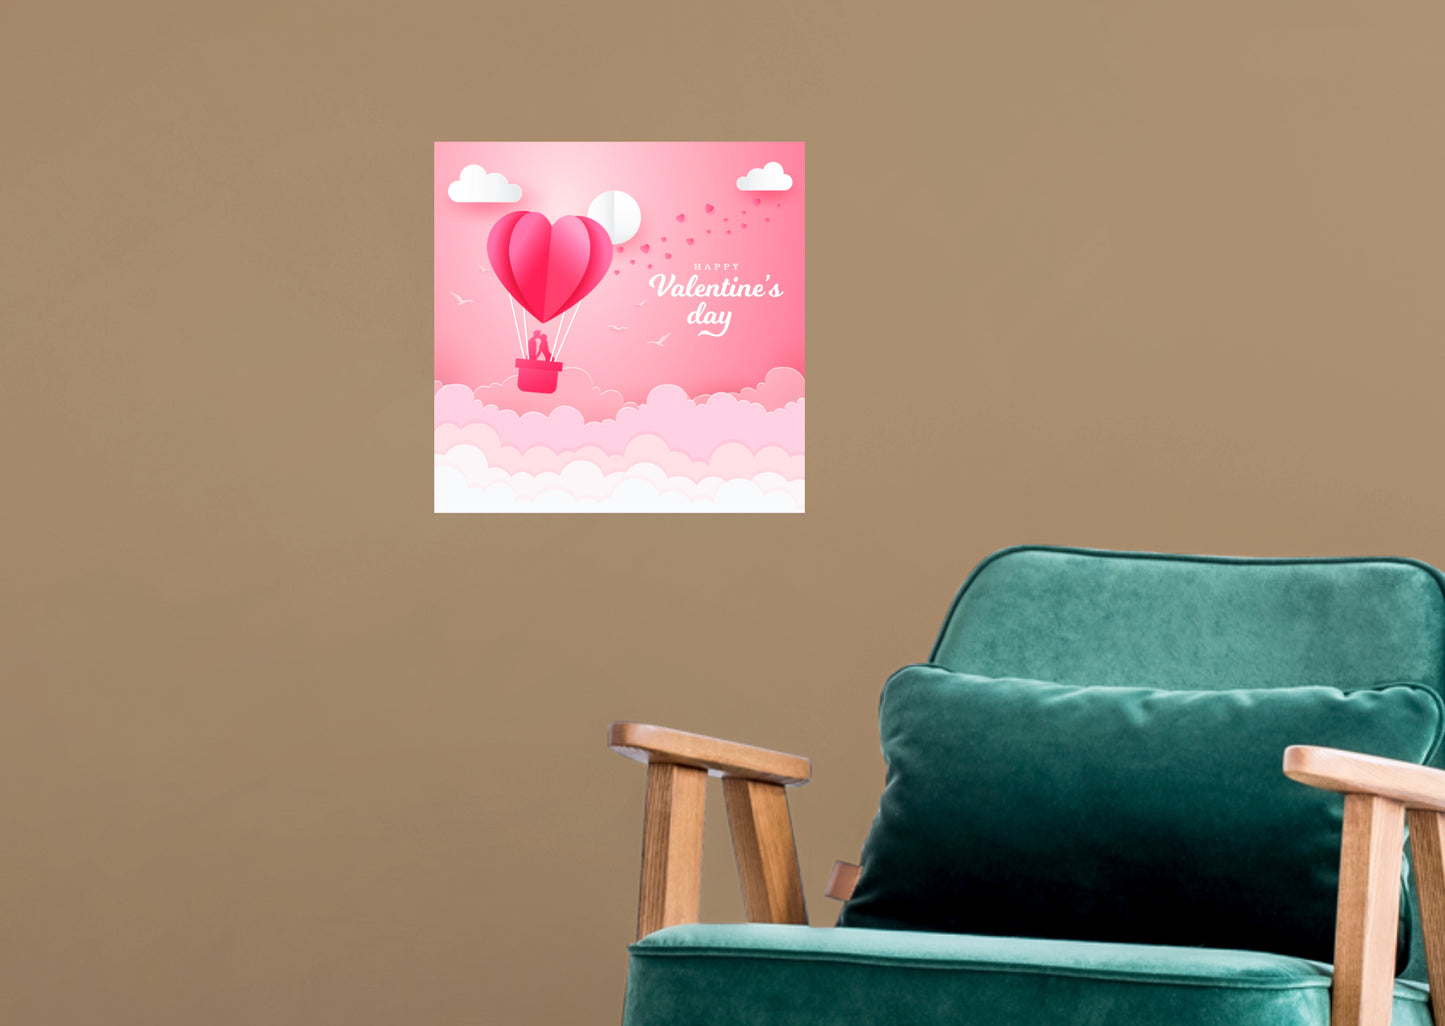 Valentine's Day:  The Baloon of Love Mural        -   Removable     Adhesive Decal